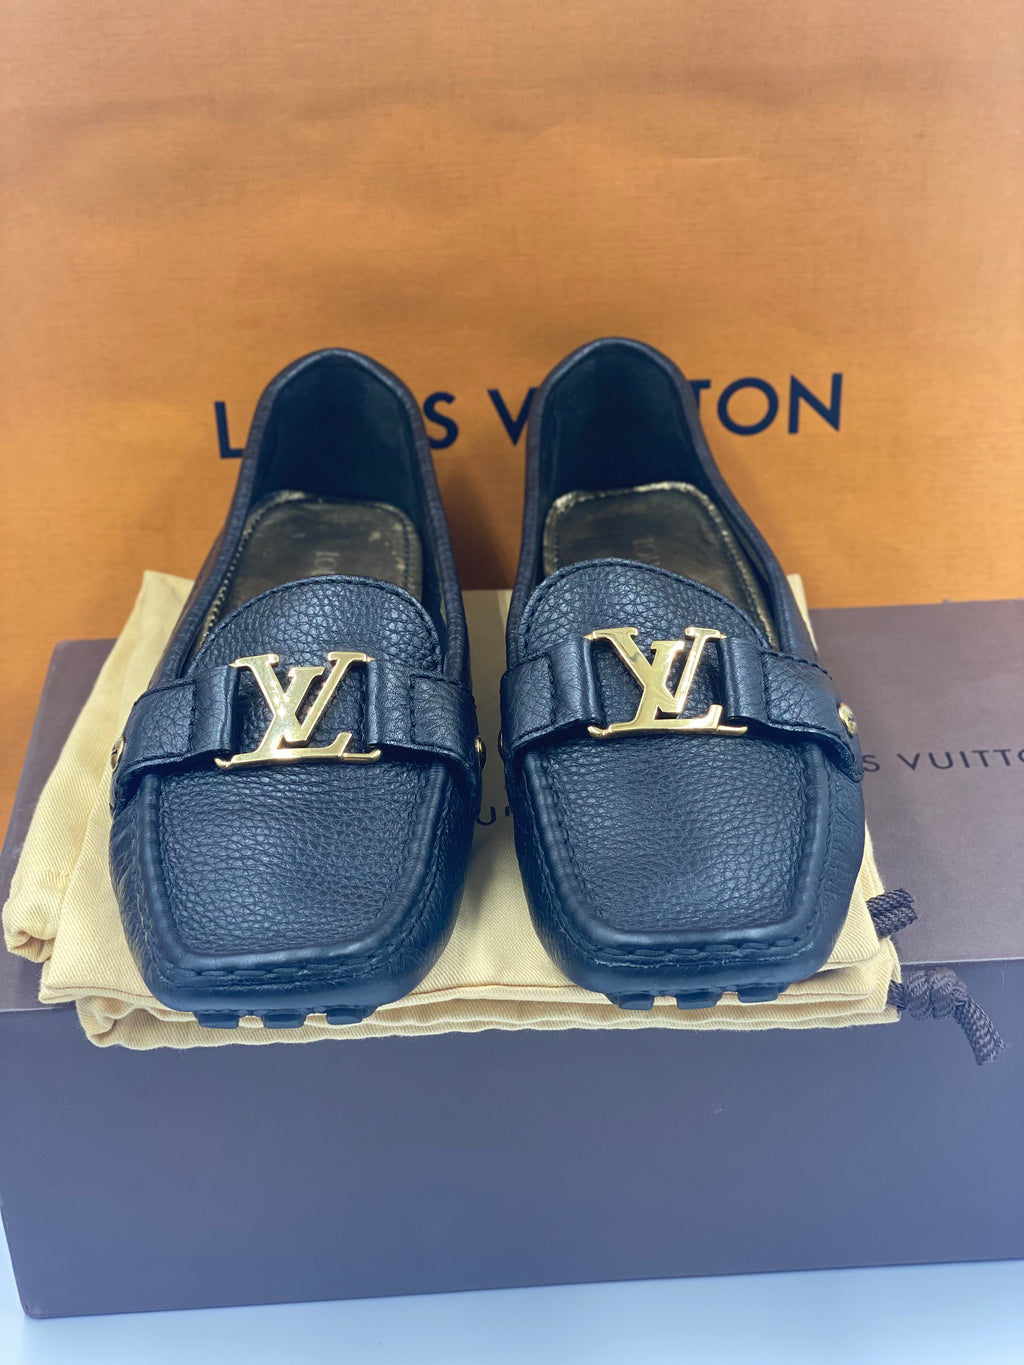 Louis Vuitton Womens Loafer & Moccasin Shoes